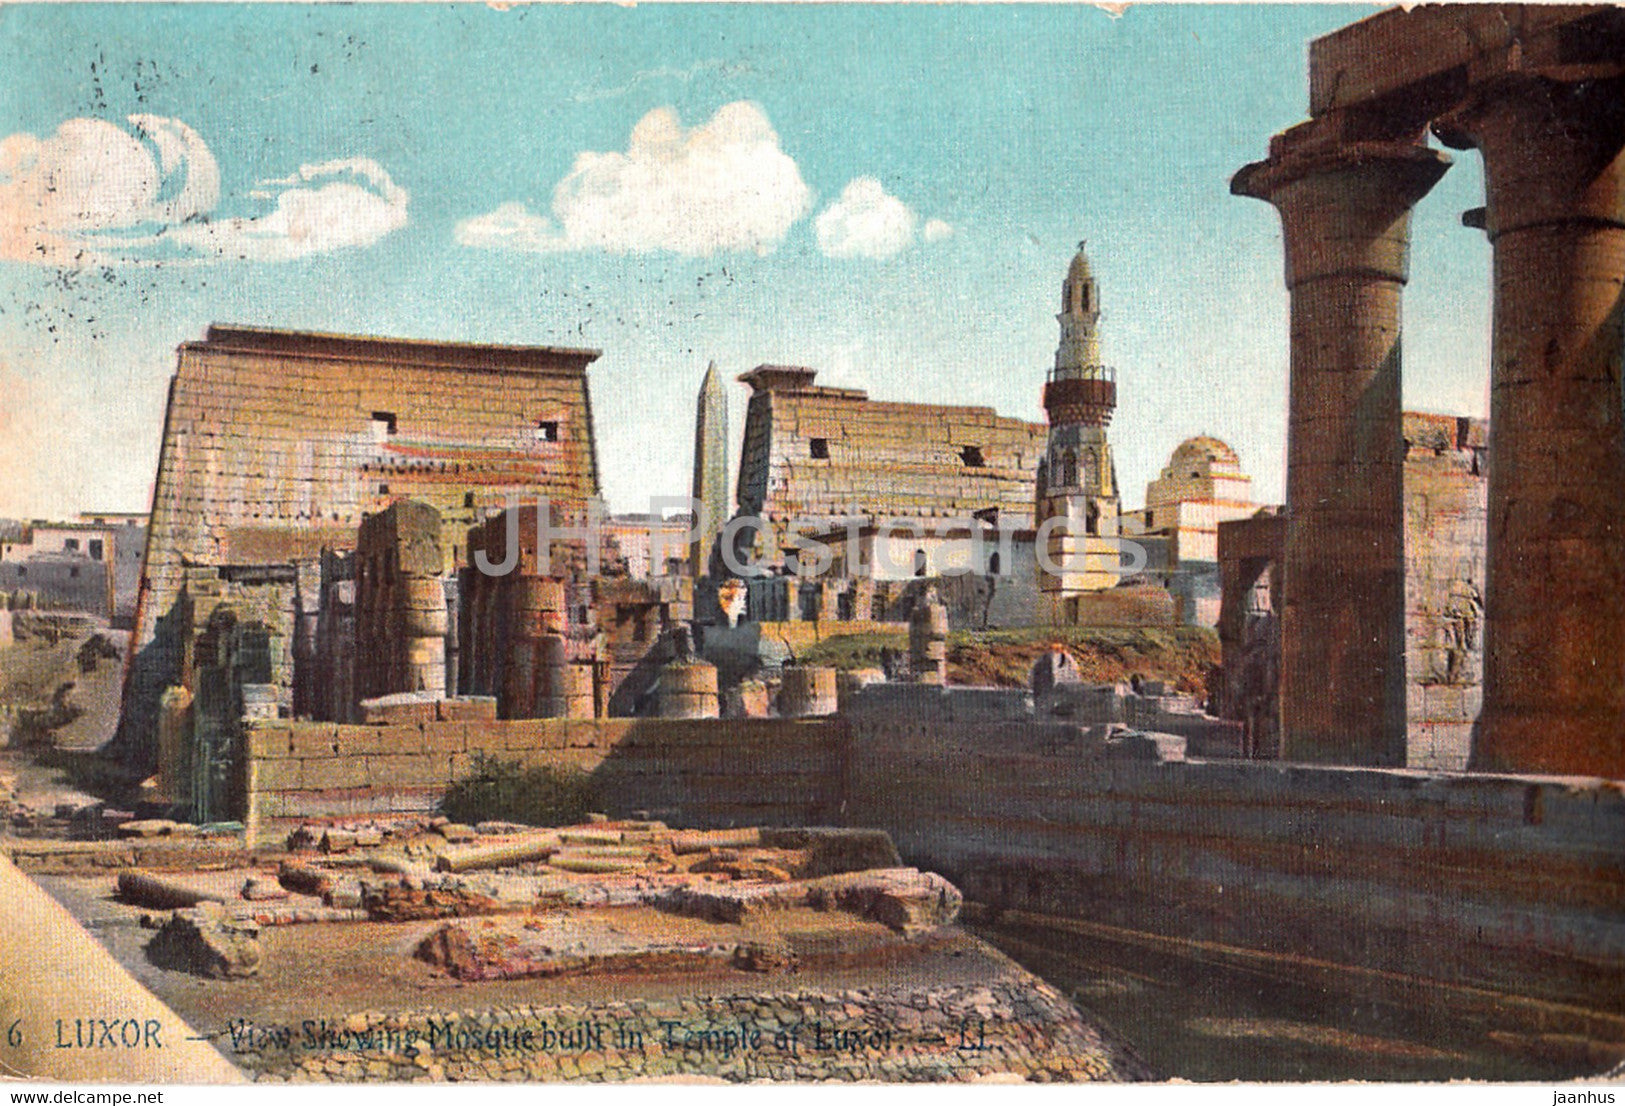 Luxor - View Showing Mosque built in Temple at Luxor - ancient world - 6 - old postcard - 1910 - Egypt - used - JH Postcards